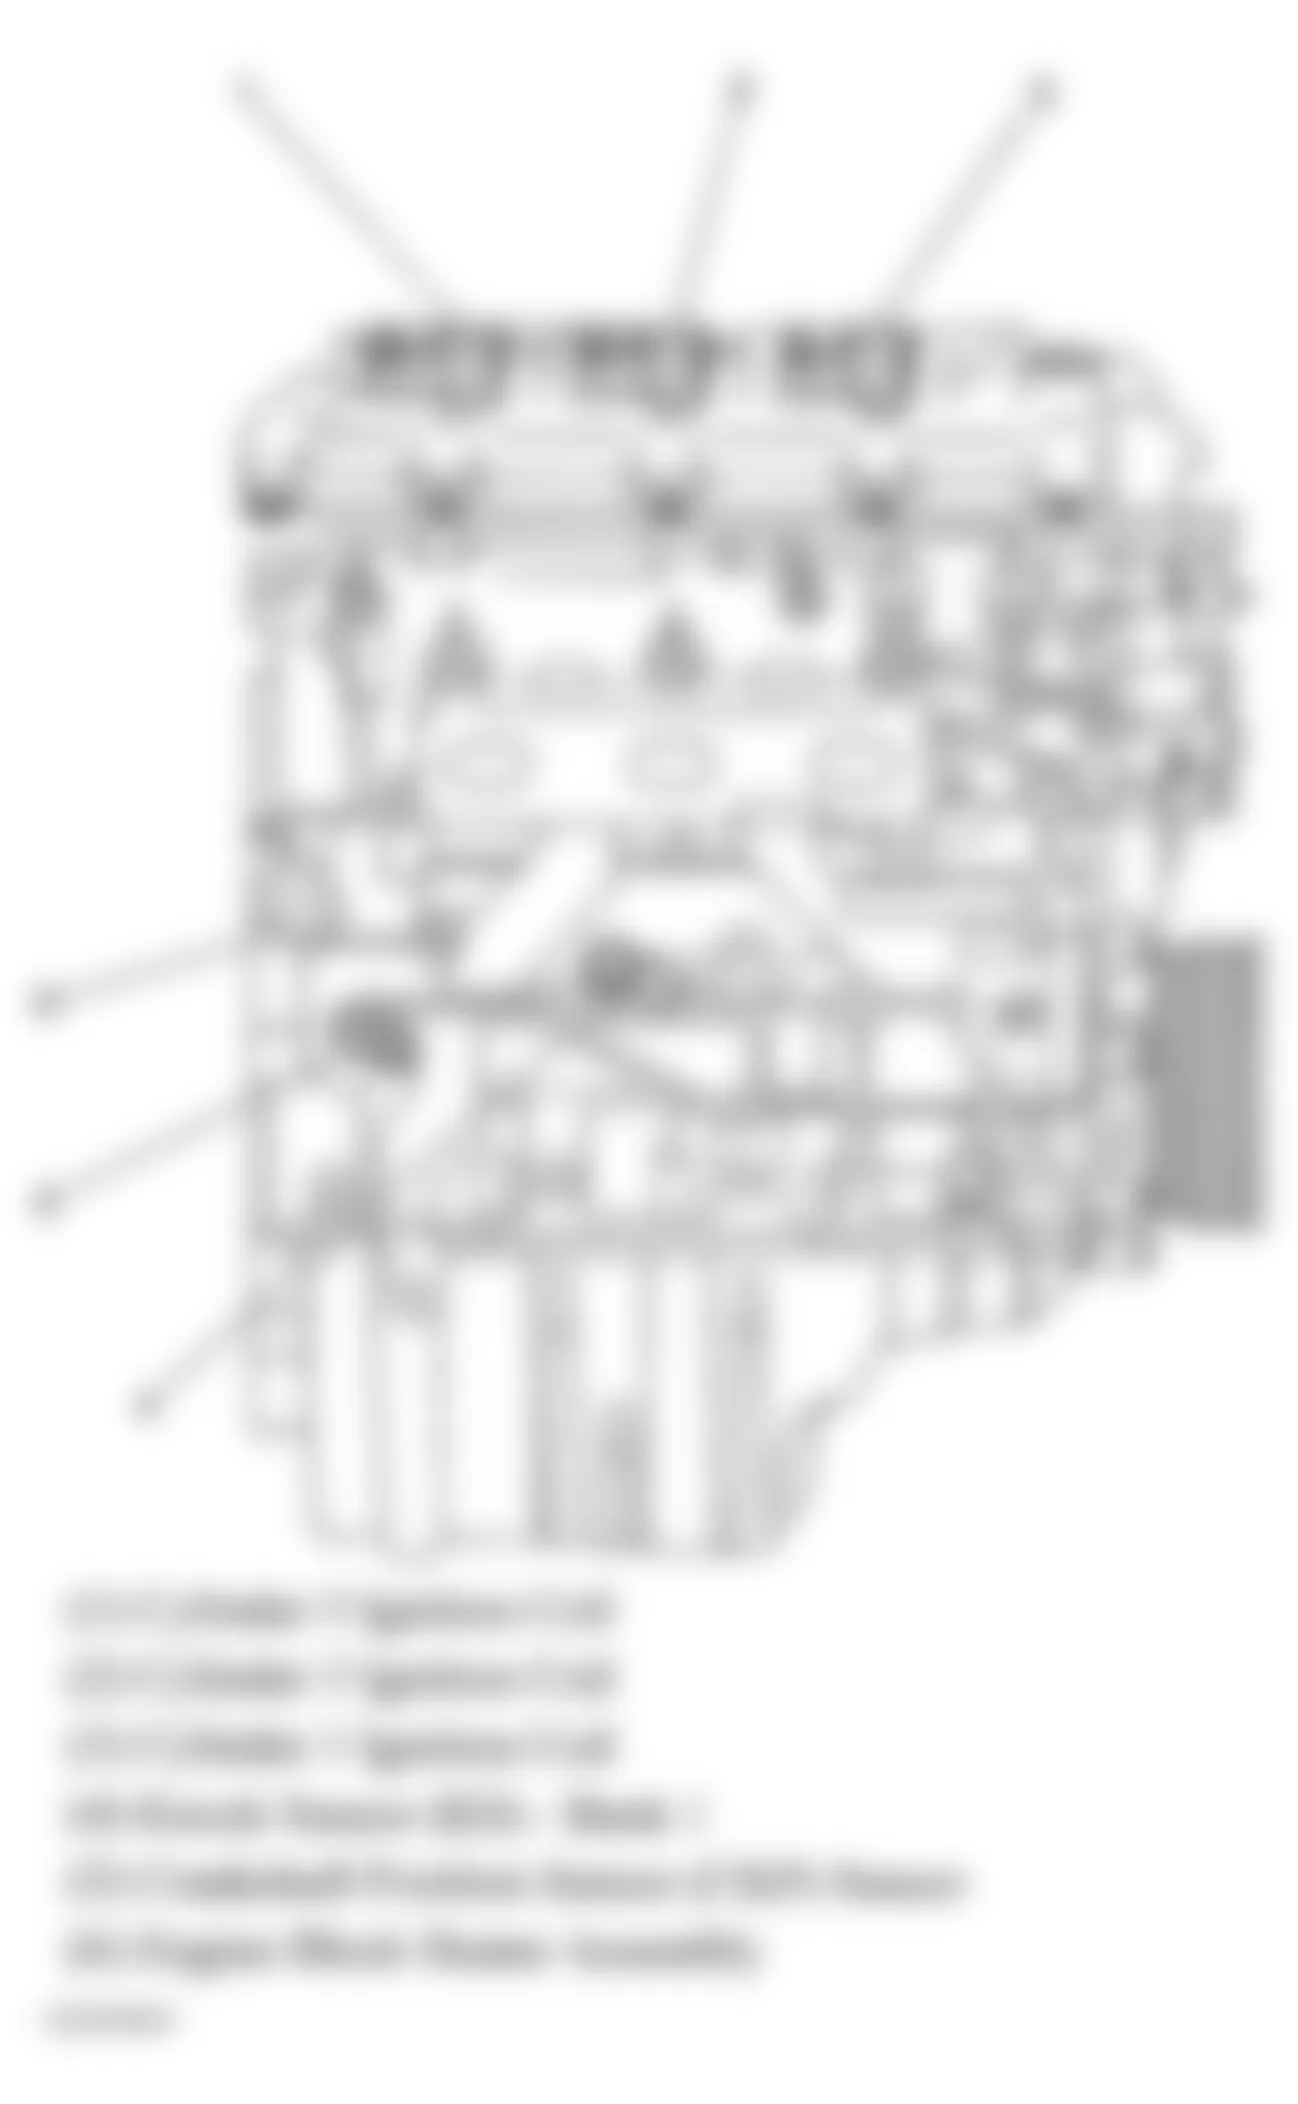 Buick Rendezvous CXL 2006 - Component Locations -  Left Side Of Engine (3.6L)